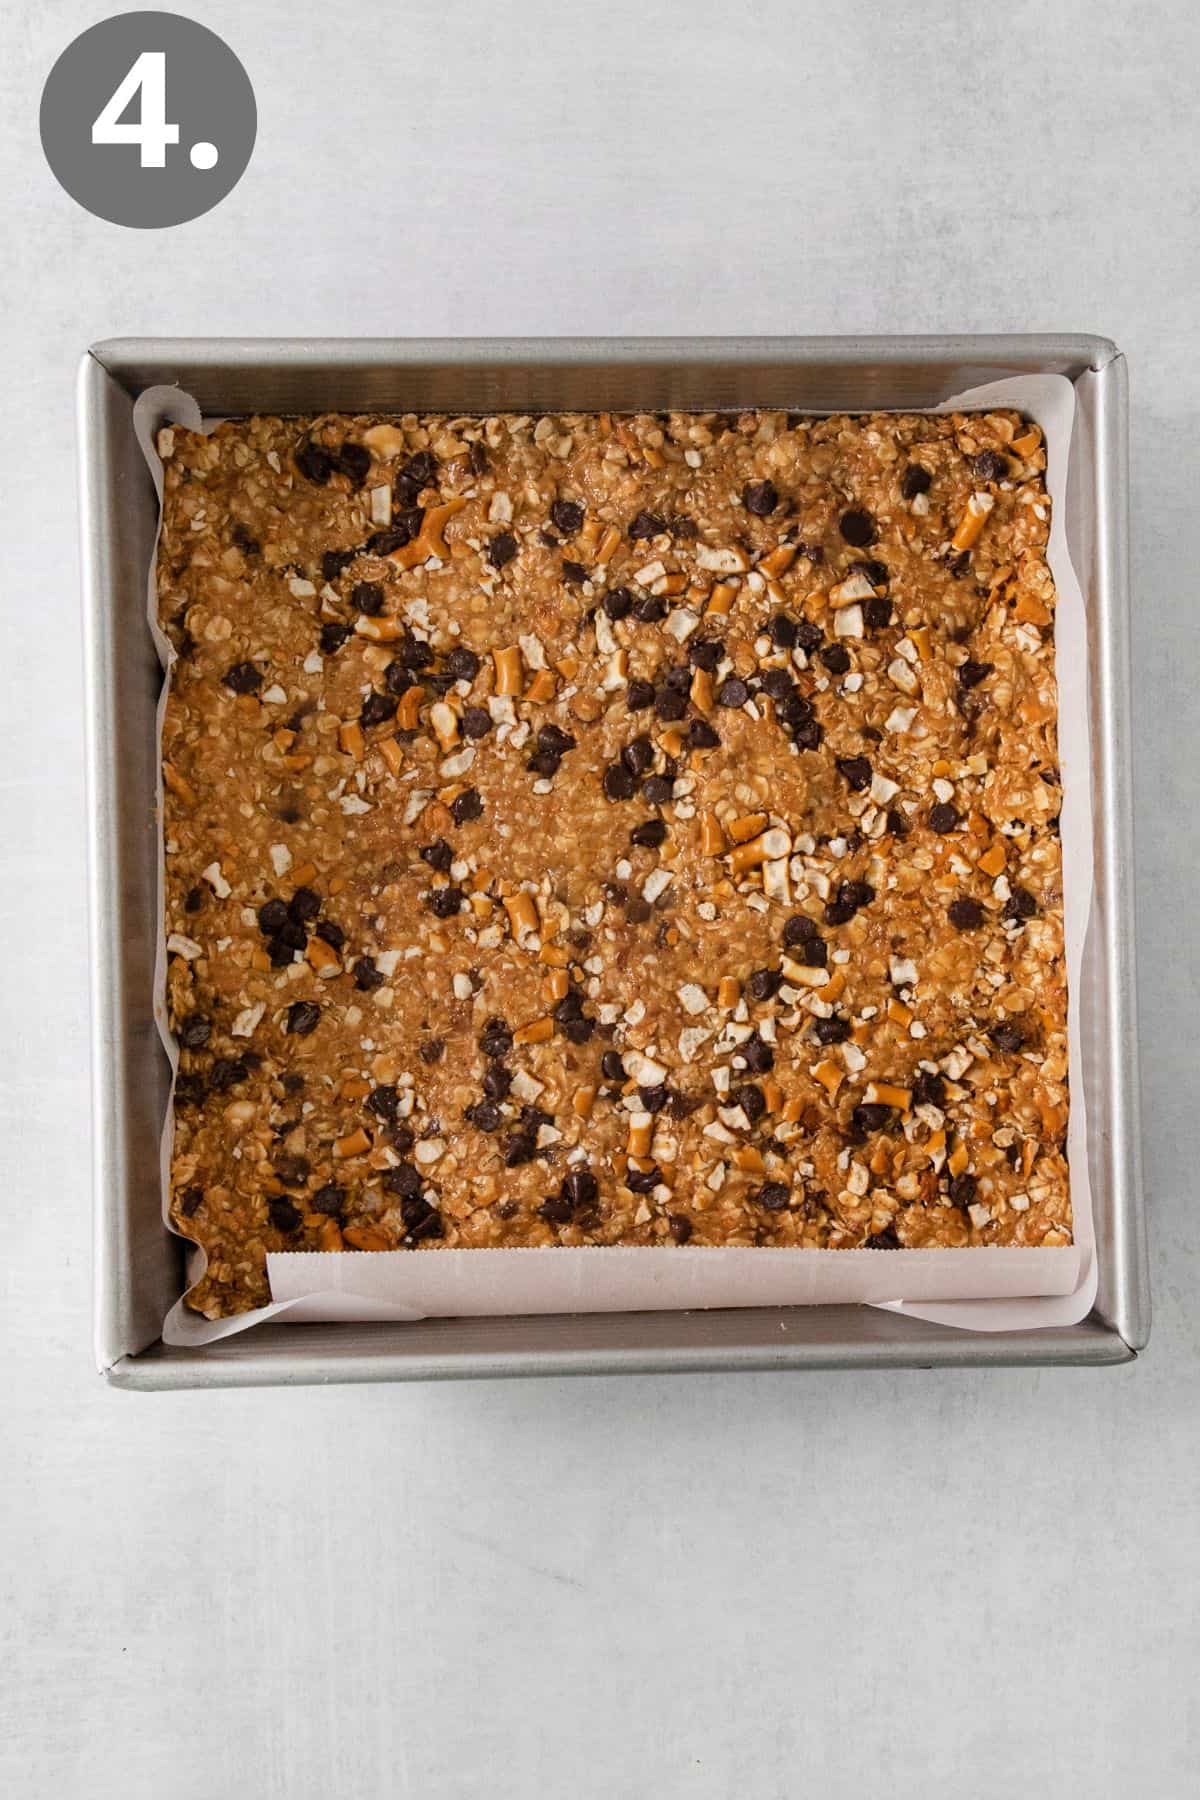 No-bake peanut butter oatmeal bars pressed into a baking dish